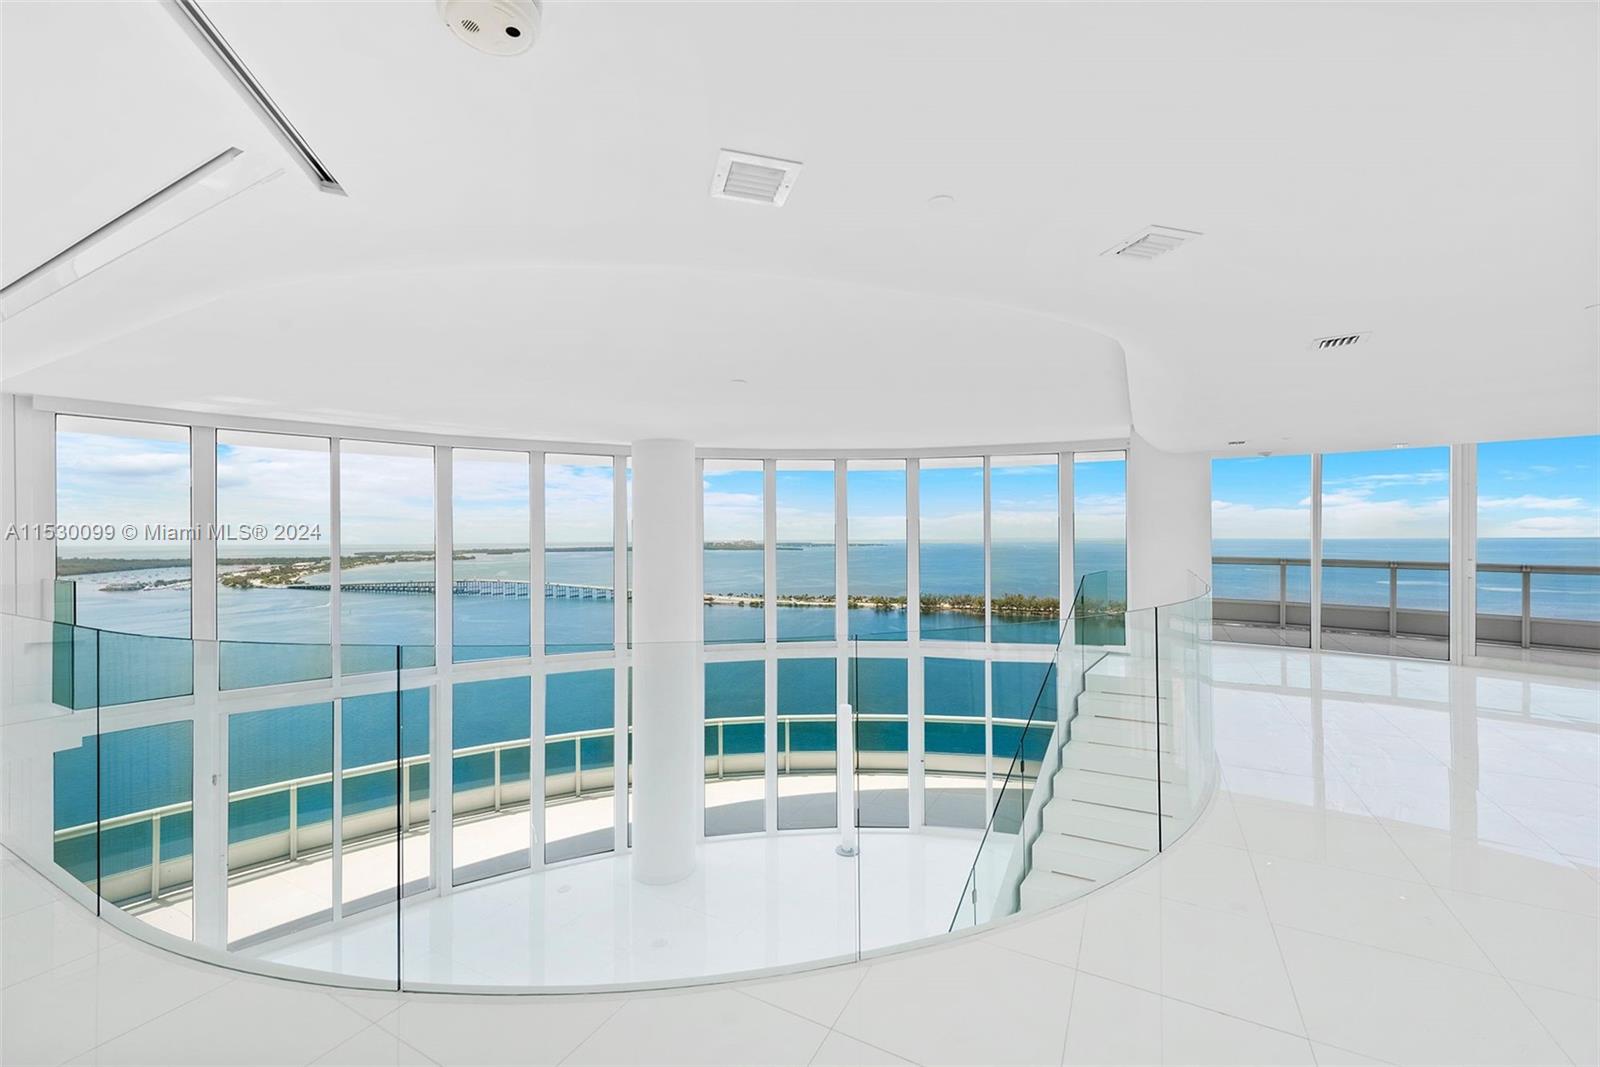 Breathtaking unobstructed views of the Bay and Ocean greet you as you step into this dramatic 2 story Townhouse on the 39th and 40th floors. 5,730 sq ft interiors were totally redesigned by a renowned architect and feature contemporary sleek finishes such as white glass 36"x36" flooring throughout, customized bathrooms, walk-in closets, designer doors, soffits and fixtures, motorized shades. An open kitchen with sliding frosted glass doors that open up to the spacious living room with 20 ft ceilings and a sweeping staircase. Architectural details and refined craftsmanship convey a sense of elegance and glamour coupled with unsurpassed relaxation. Santa Maria offers 5 star amenities, a fitness center, restaurant, heated pool, lighted tennis court, marina access and 24 hour security.